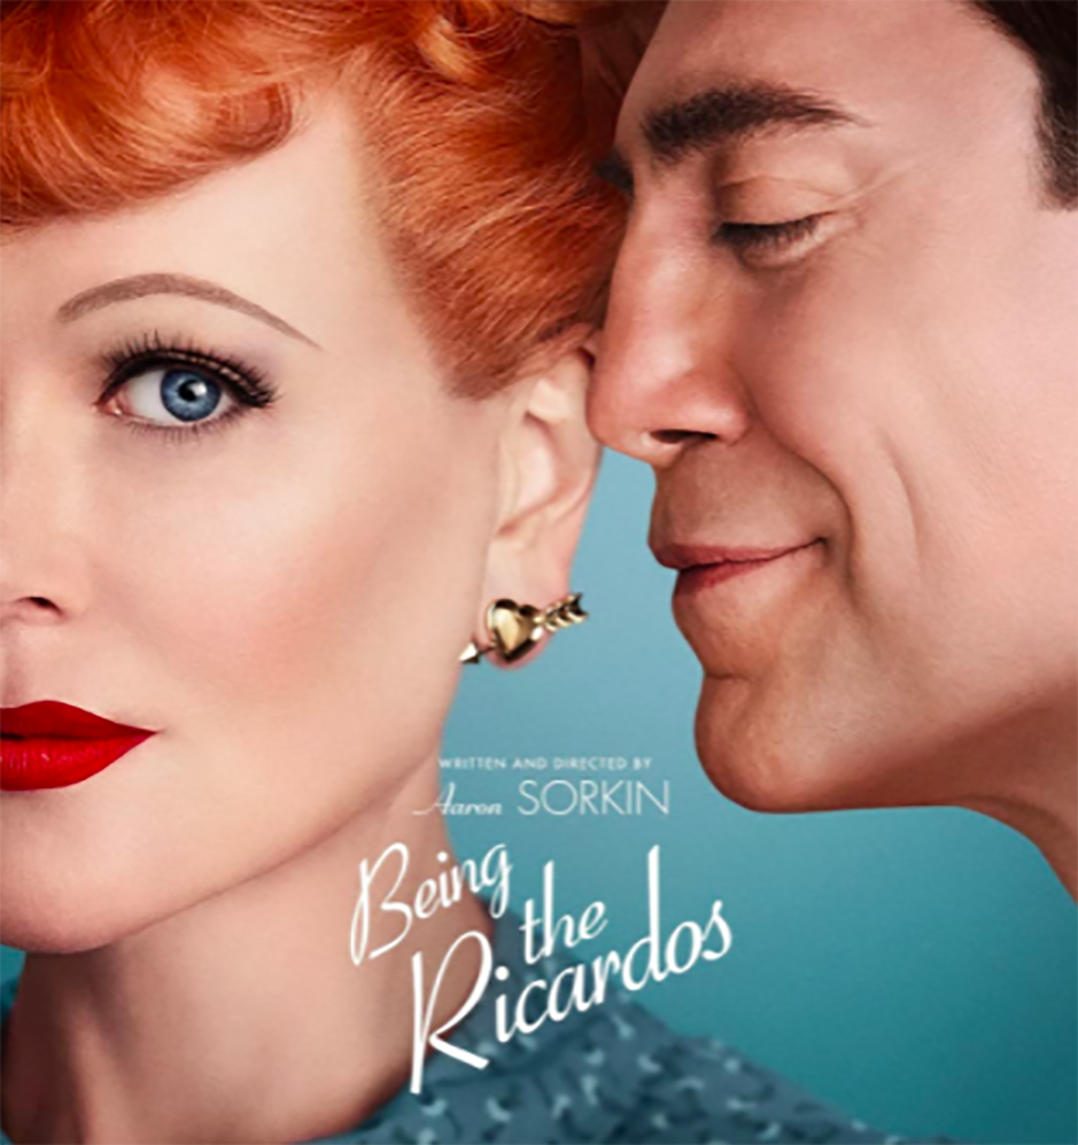 ‘Being the Ricardo’s’ is one of the year’s treats